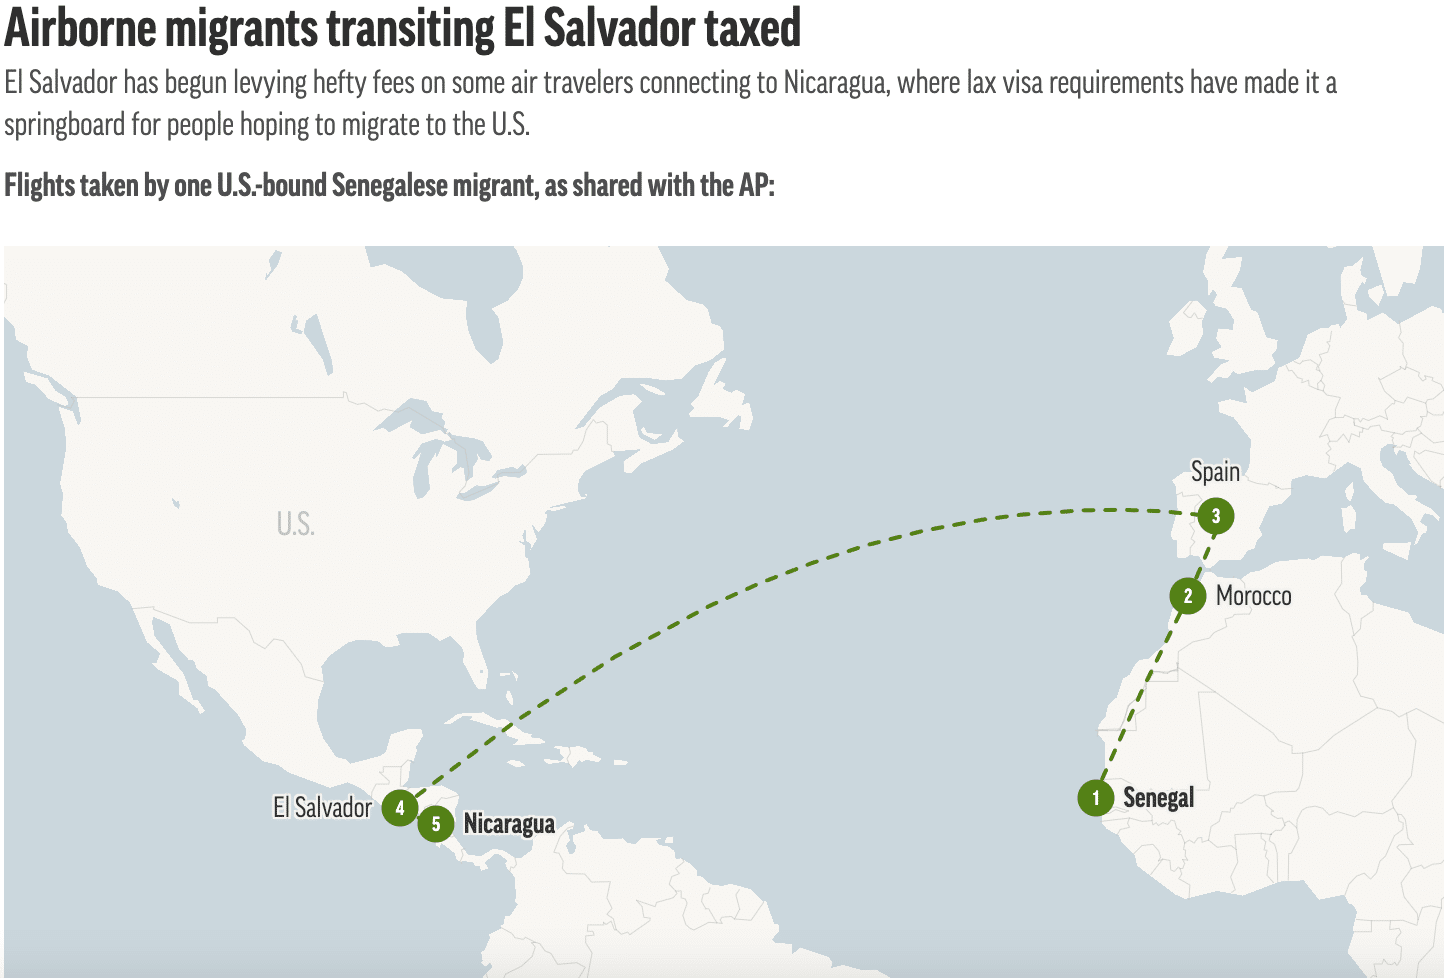 Flights taken by one U.S.-bound Senegalese migrant, as shared with the AP: